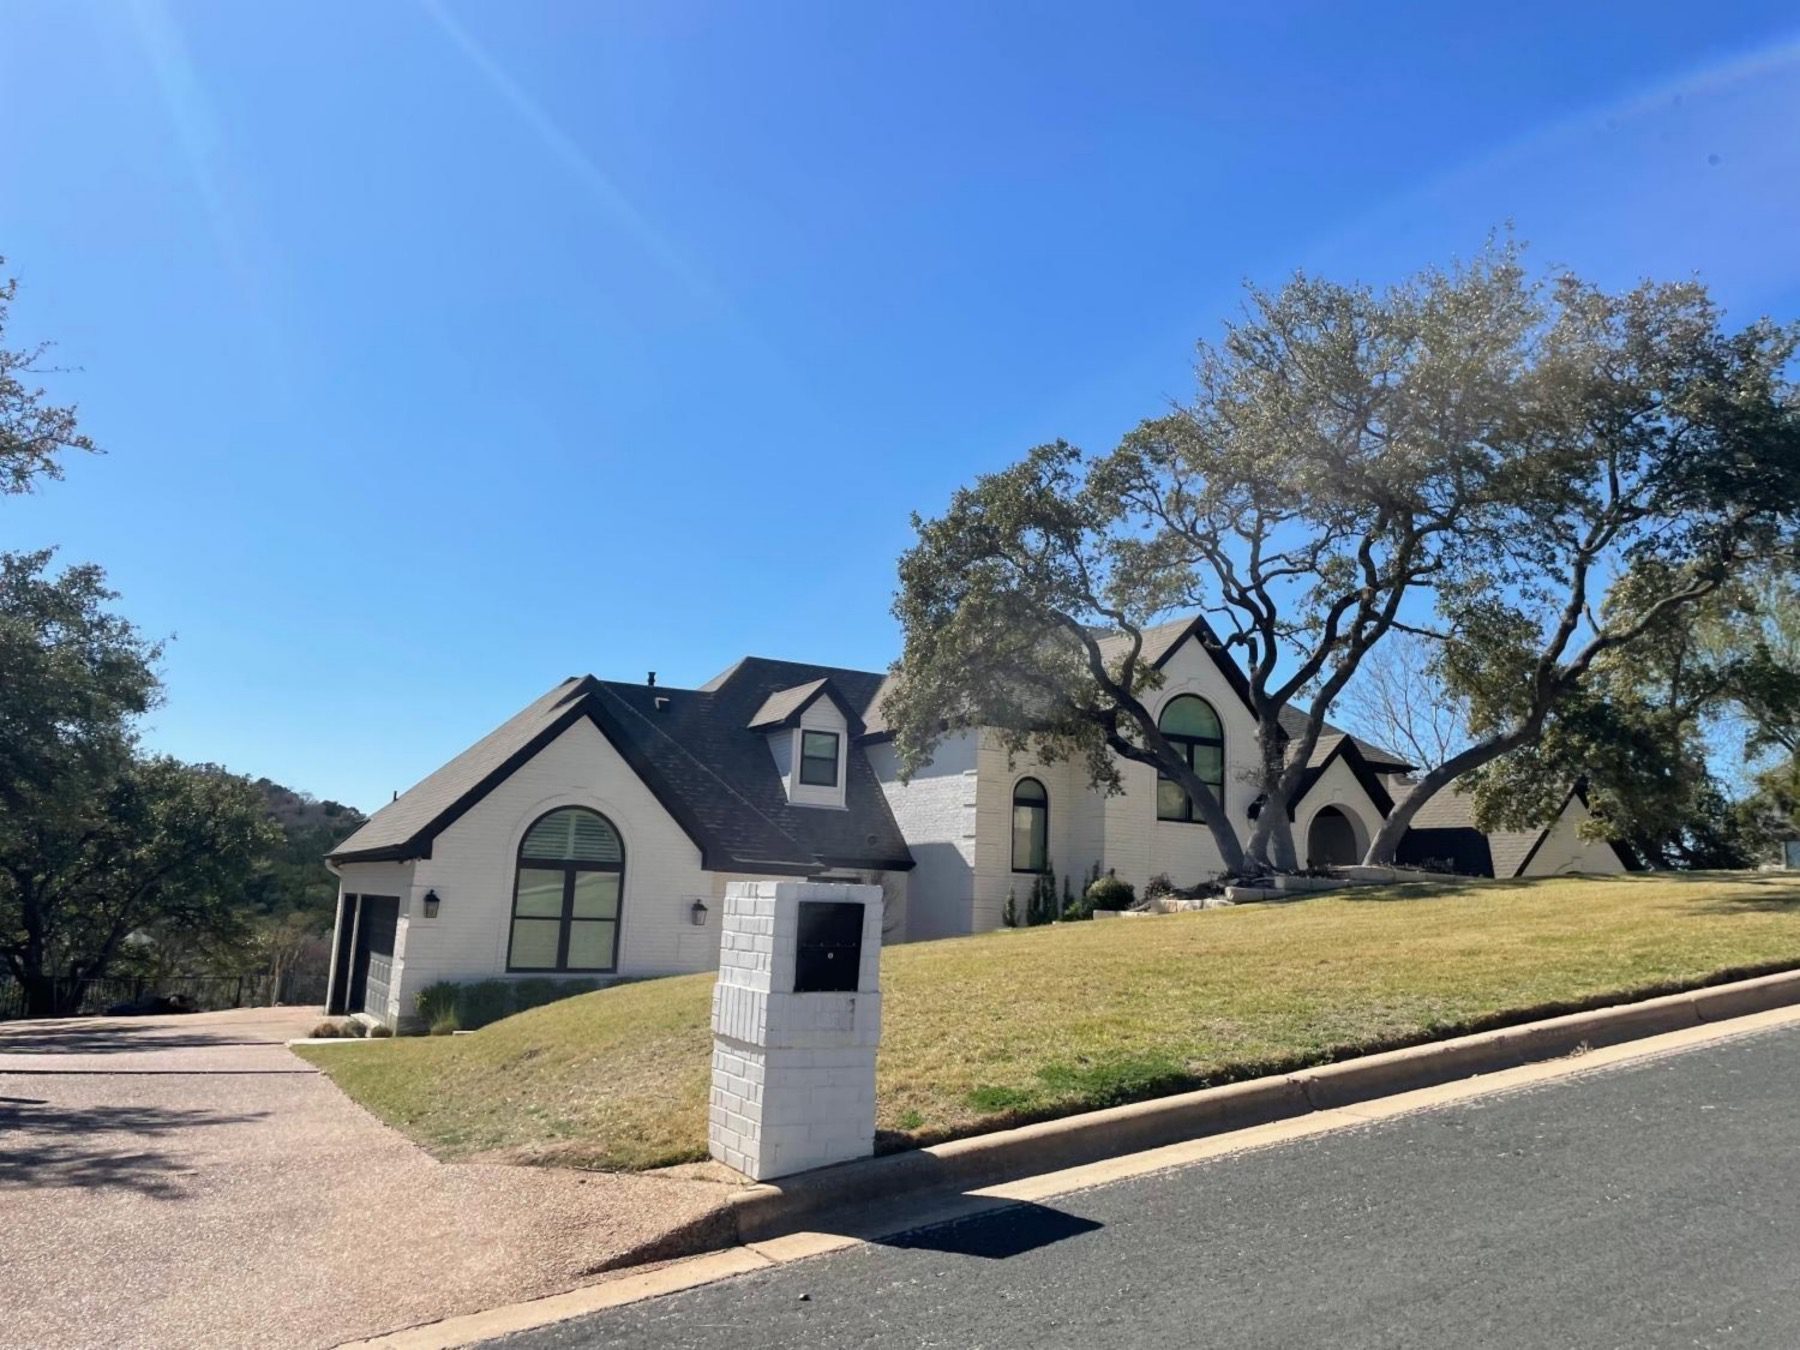 tierra madrones remodeled white brick home in Austin texas 78746